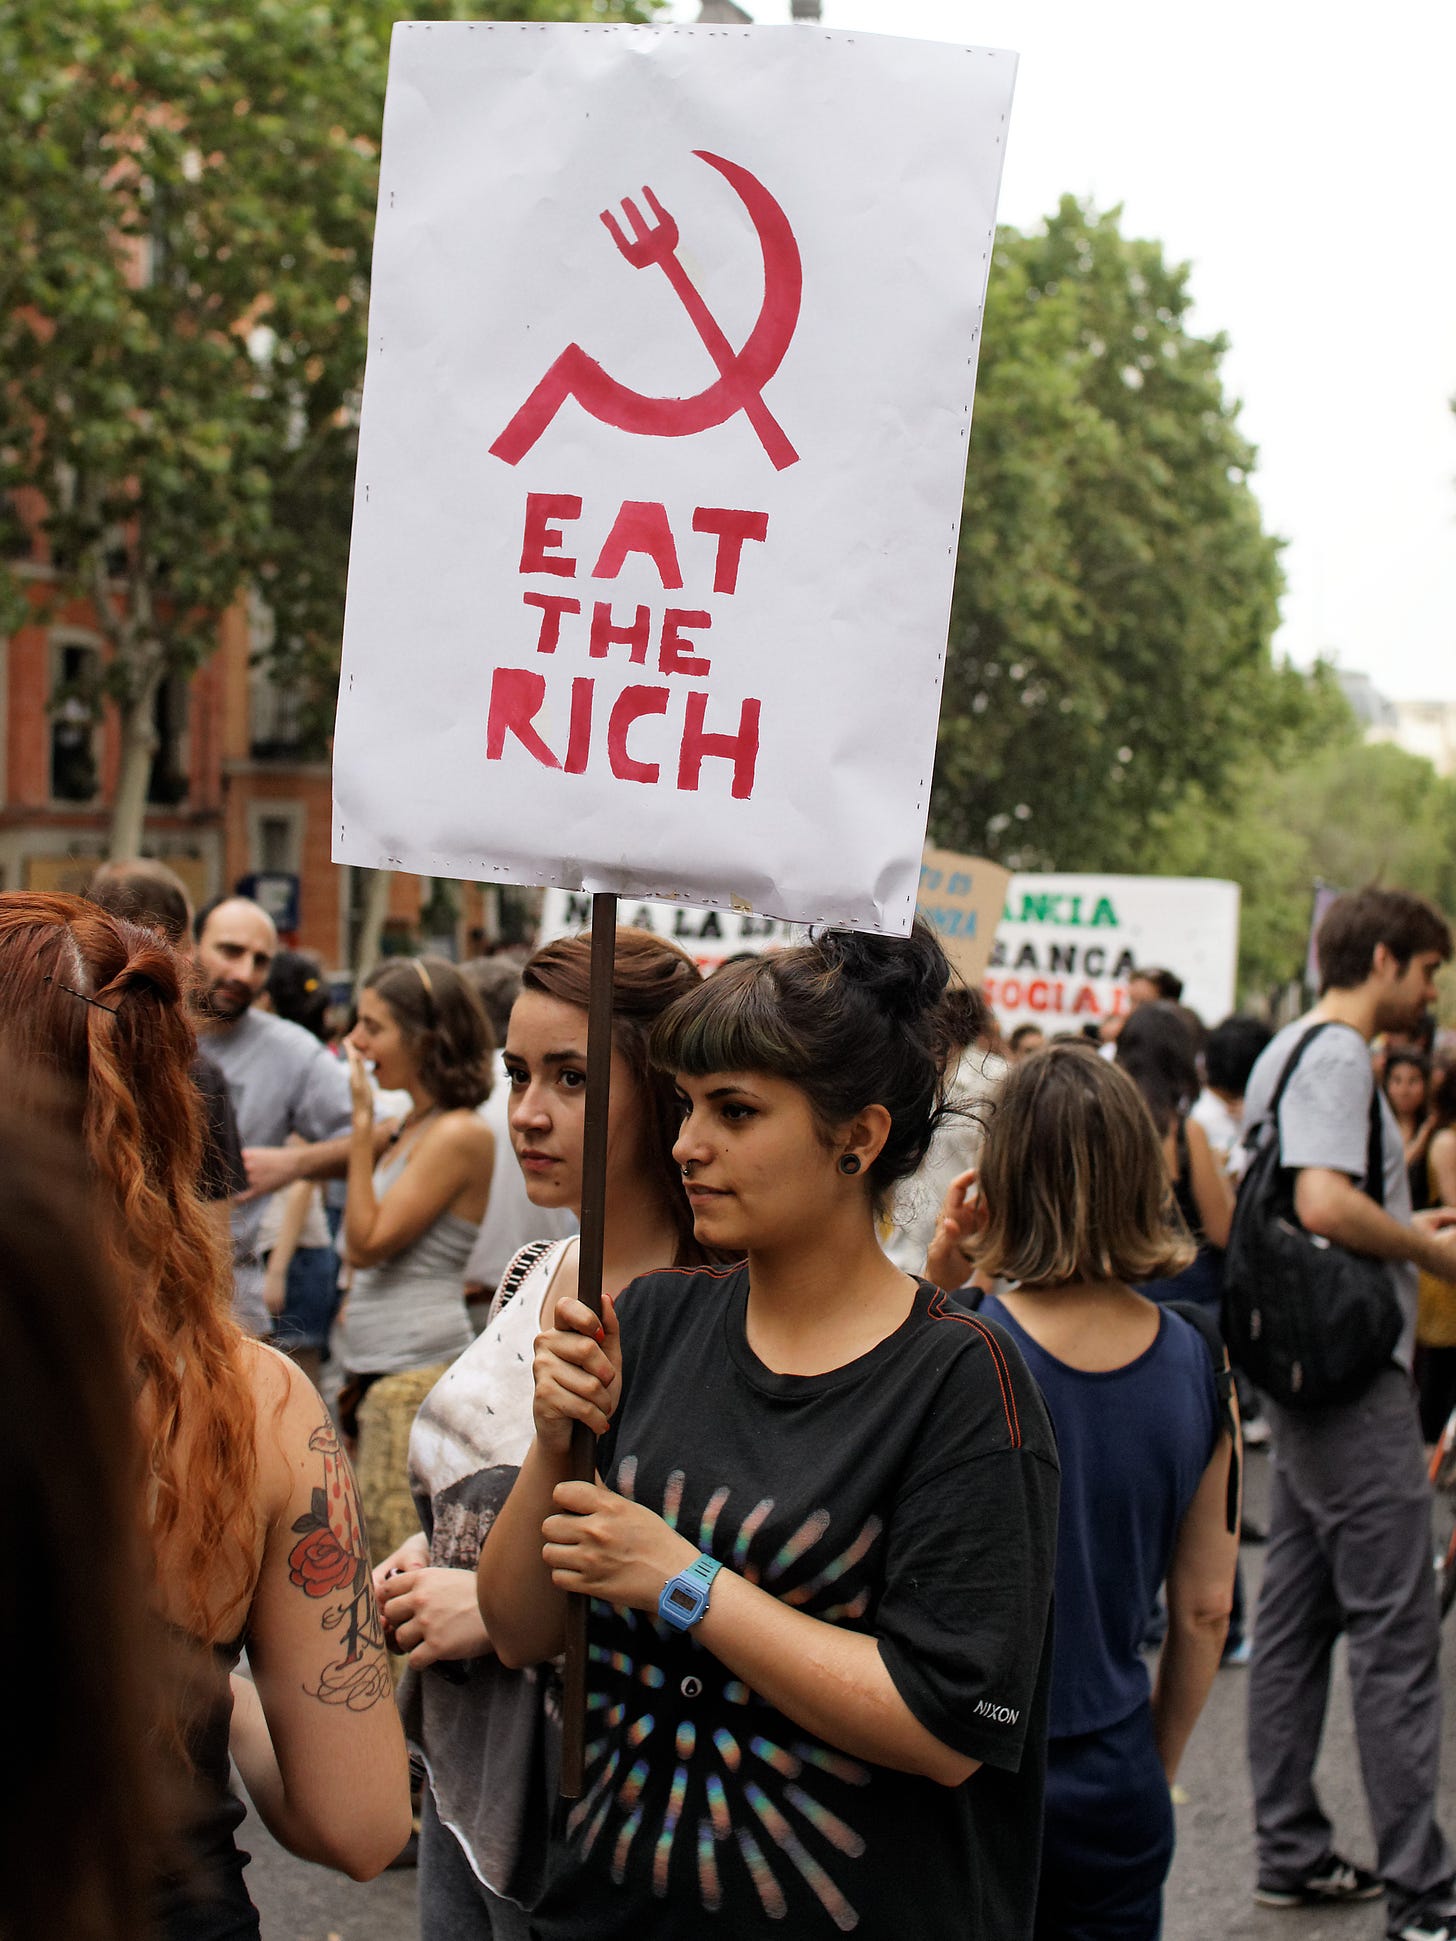 Eat the rich - Wikipedia